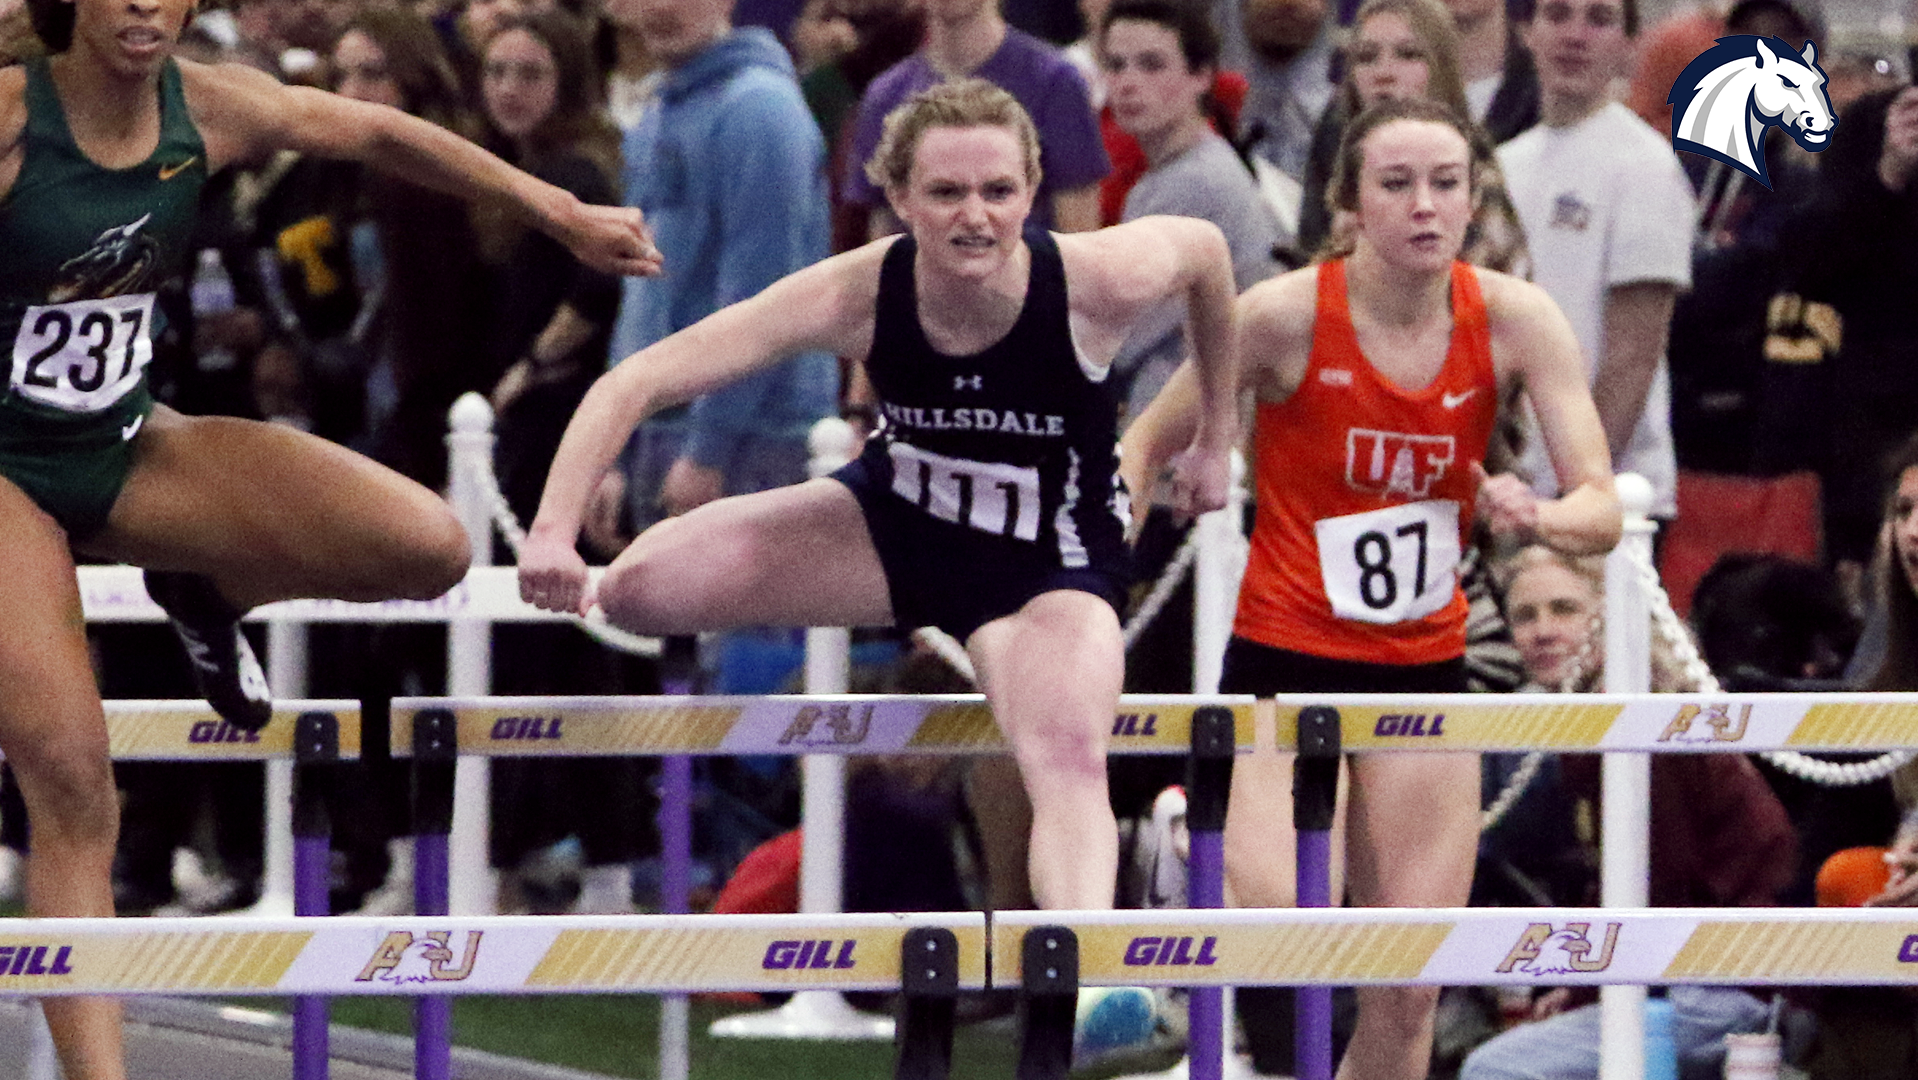 Big marks for Chargers women highlight annual Tune-Up meet on Saturday